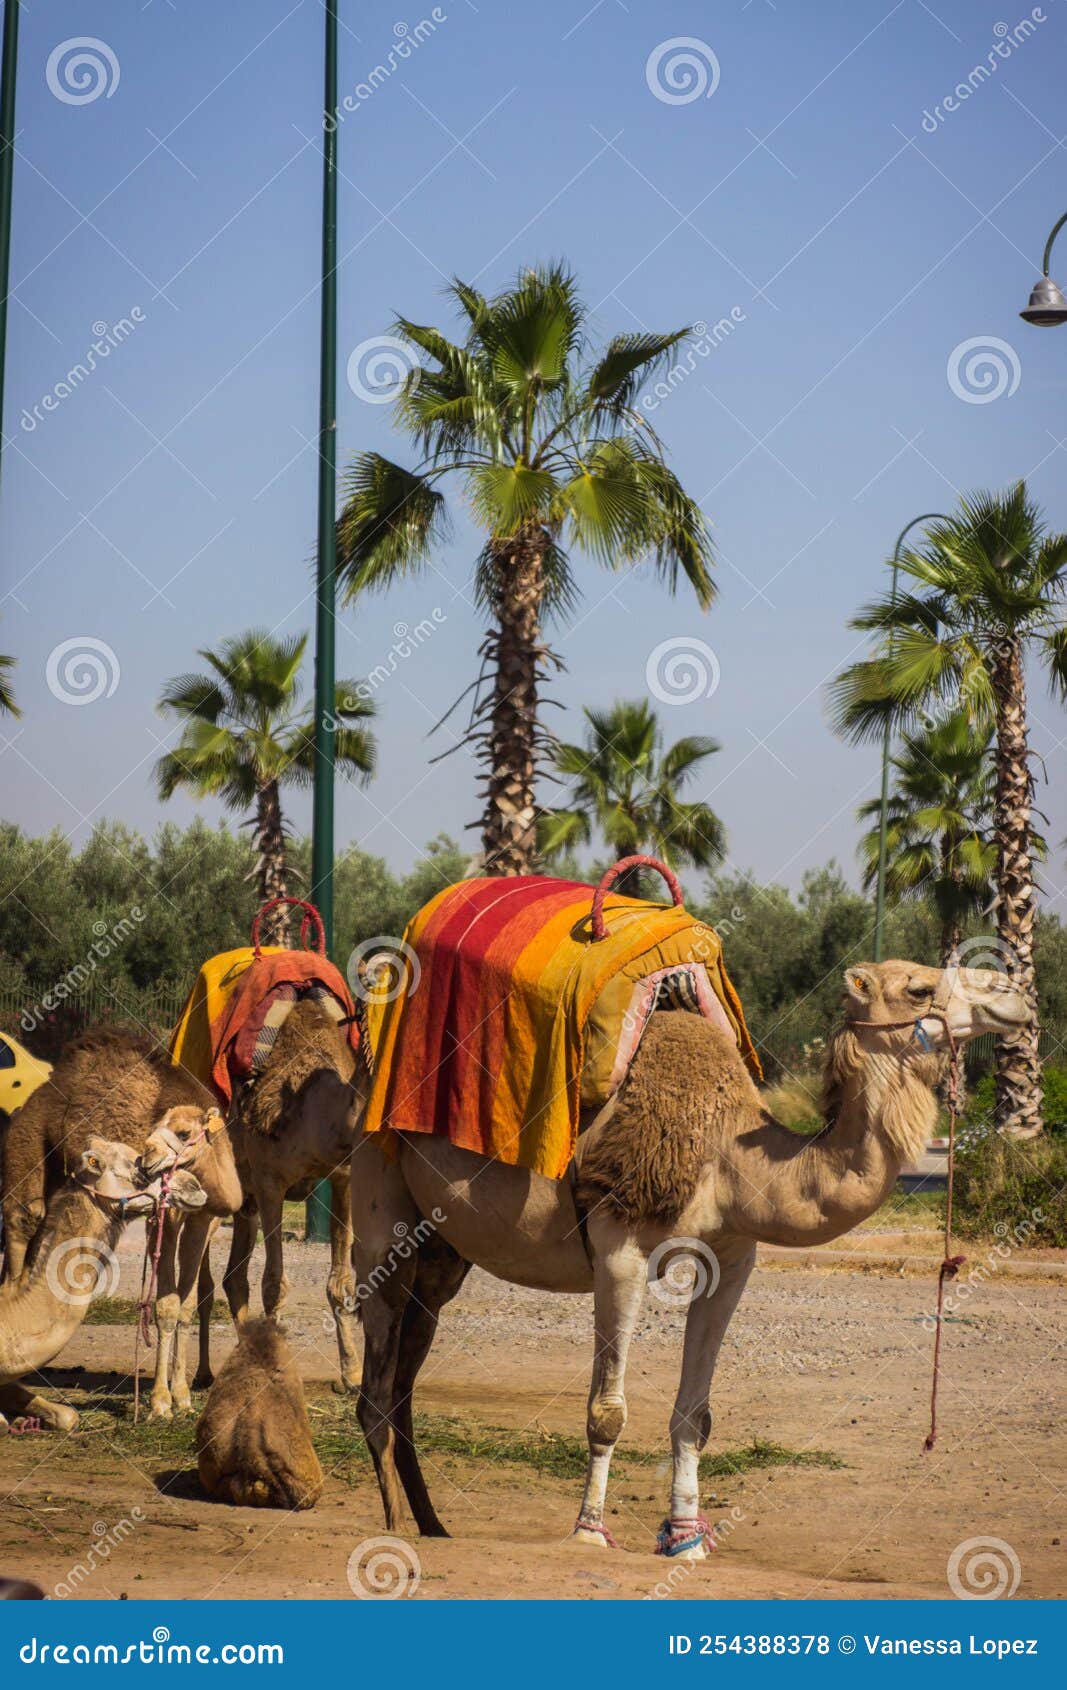 camels in the desert of morocco